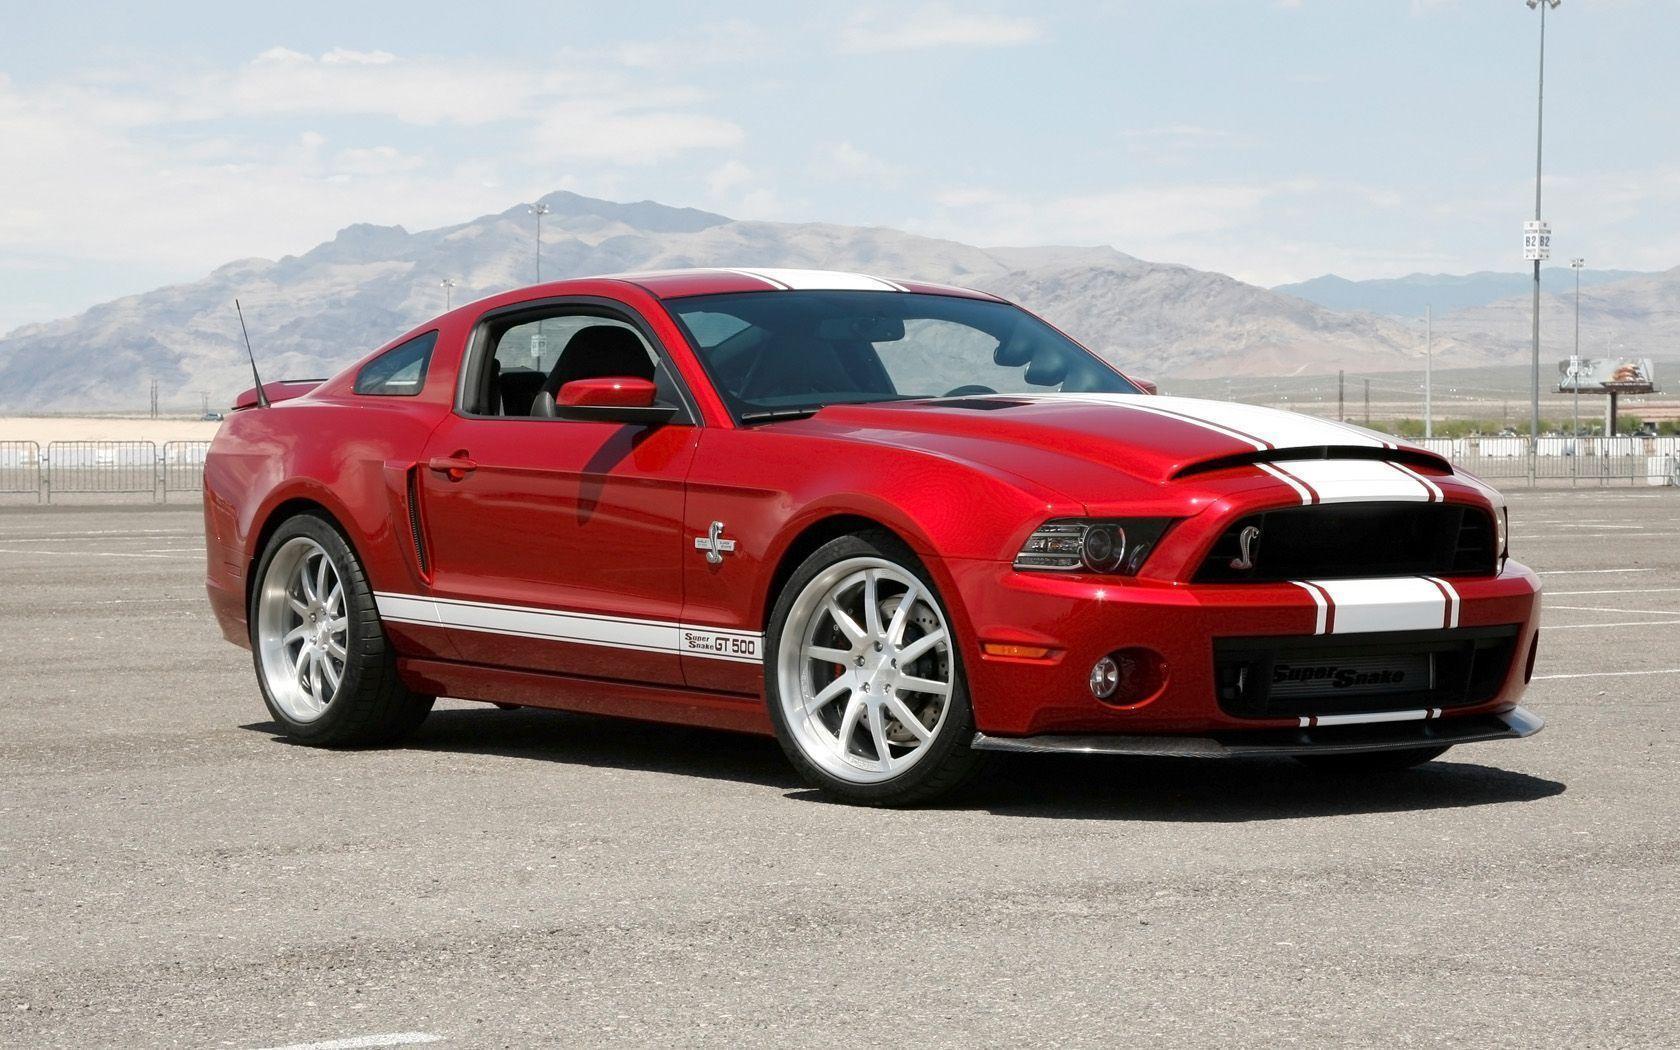 Ford Mustang GT500 Shelby Free HD Wallpaper For Desktop